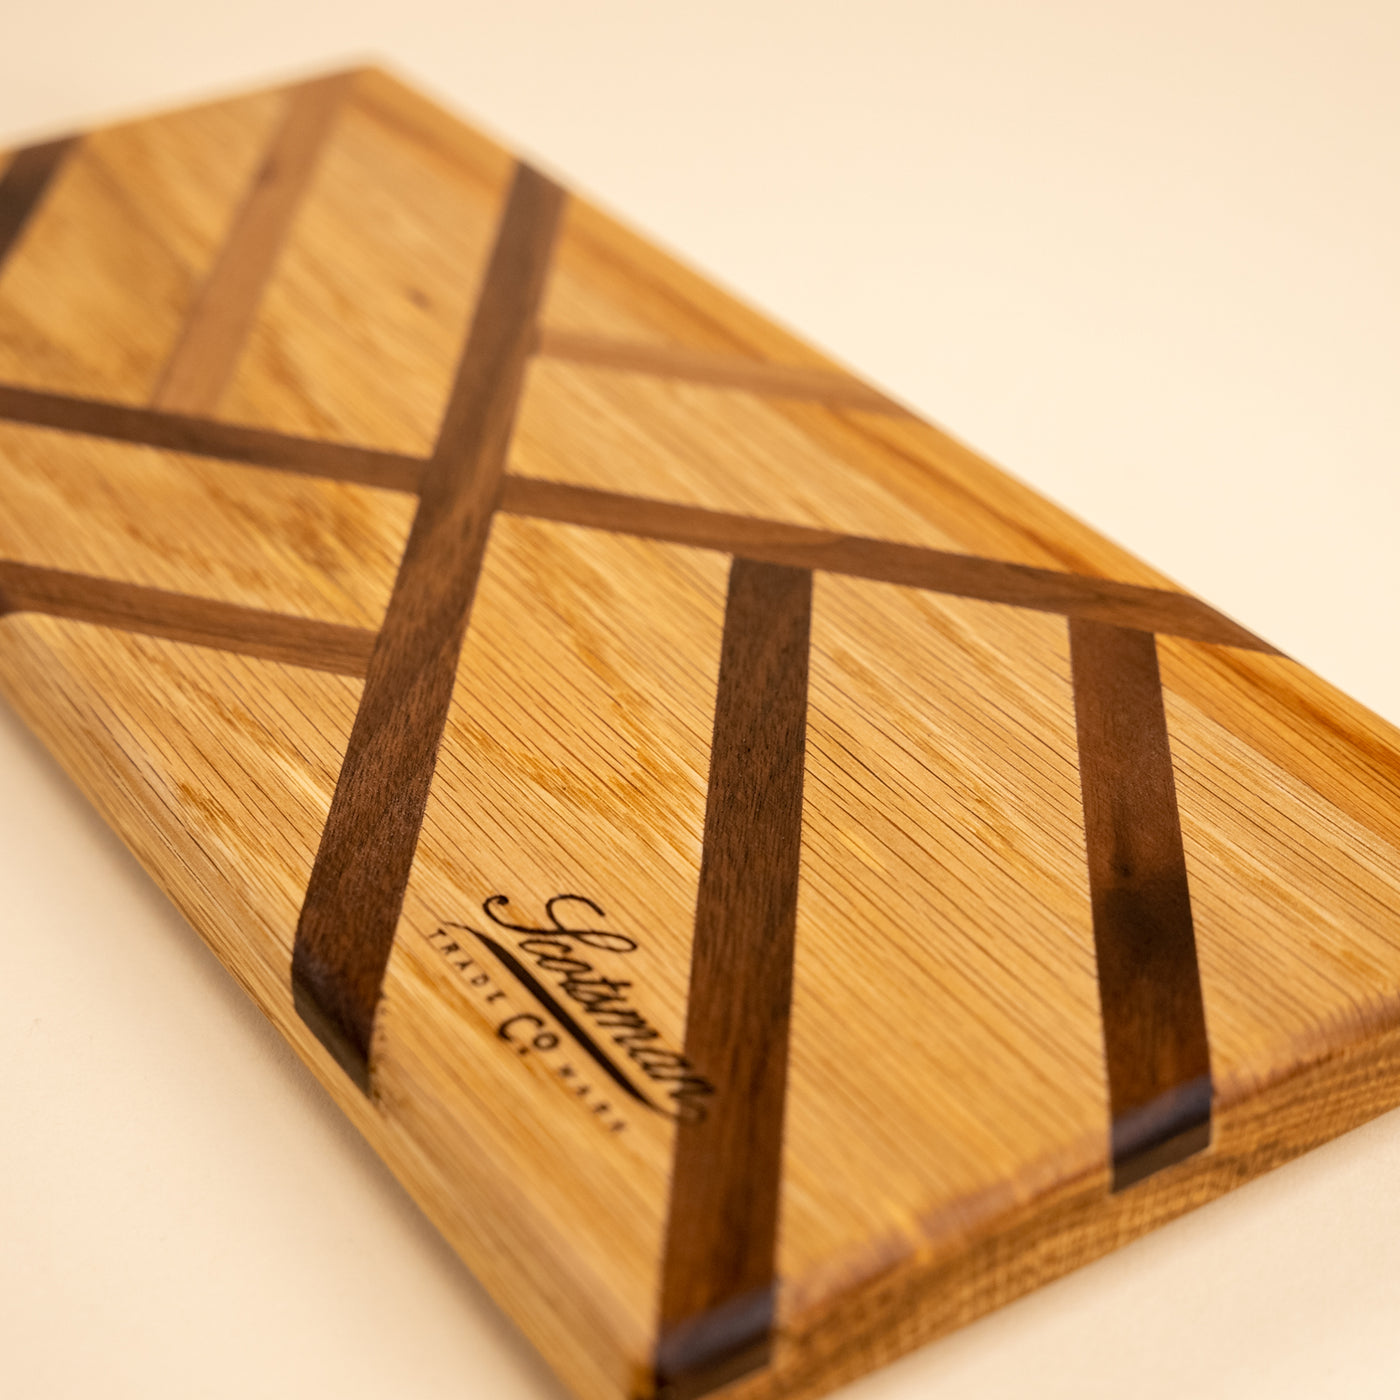 Architecture Serving Board | Cottage